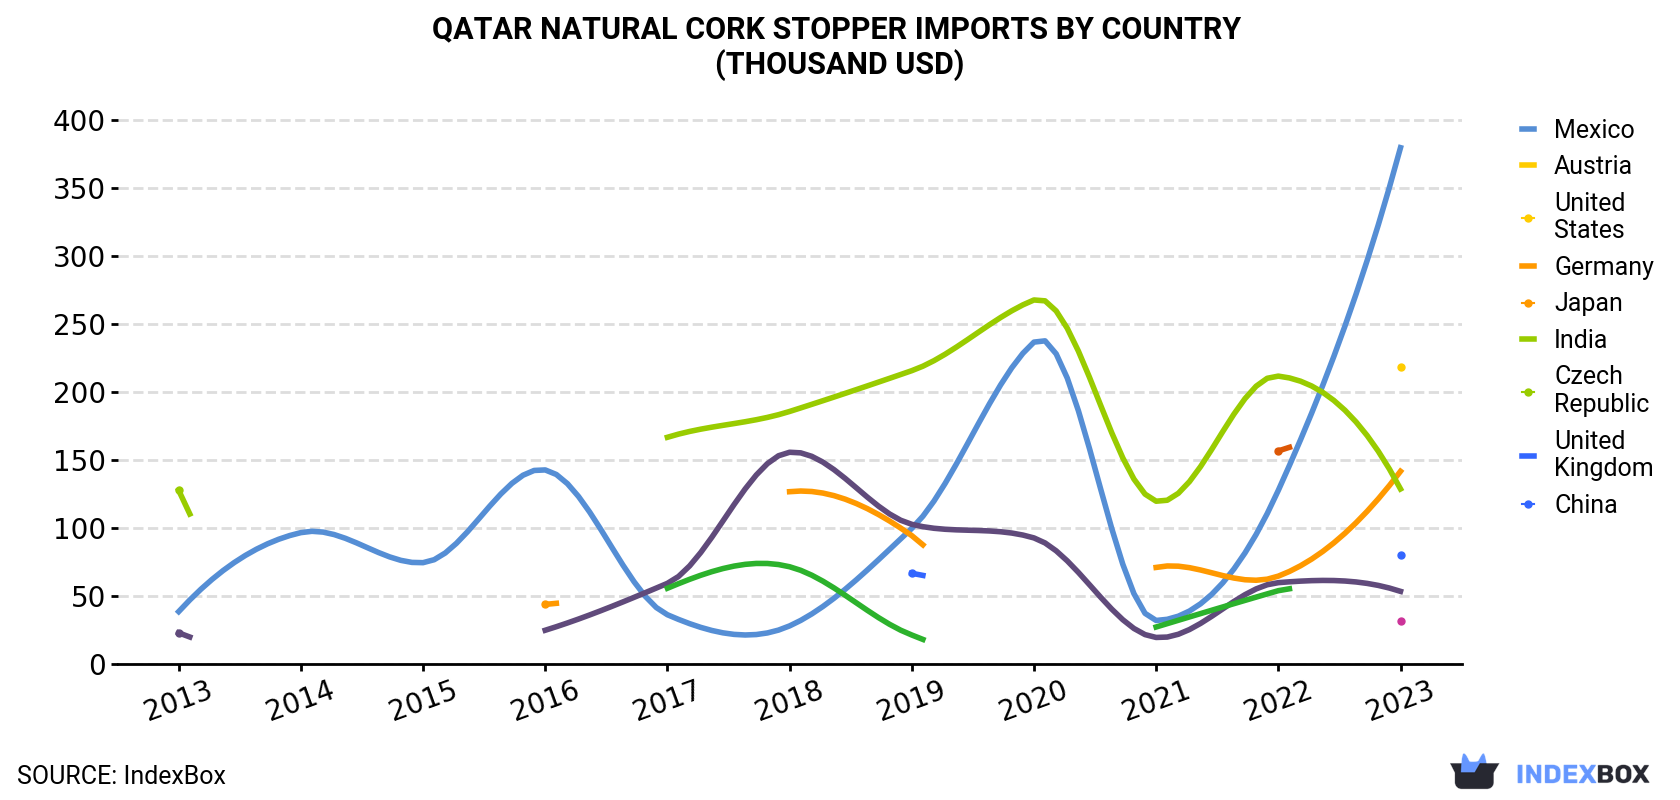 Qatar Natural Cork Stopper Imports By Country (Thousand USD)